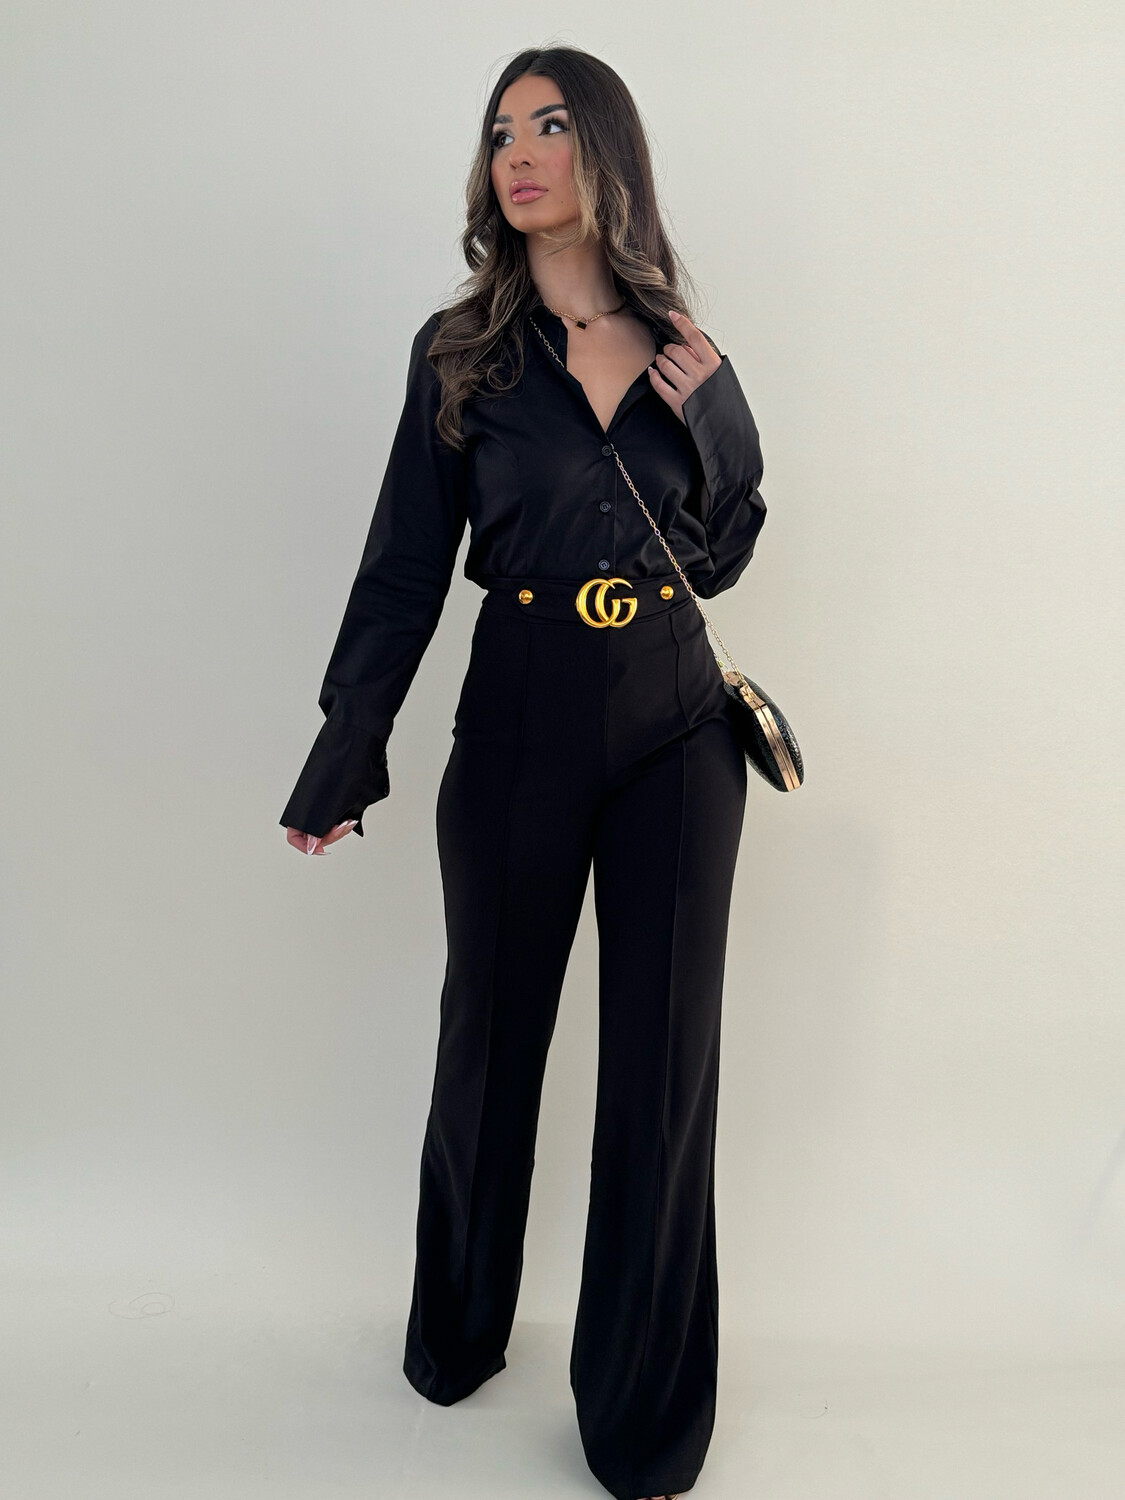 Black Gucci Inspired Pants